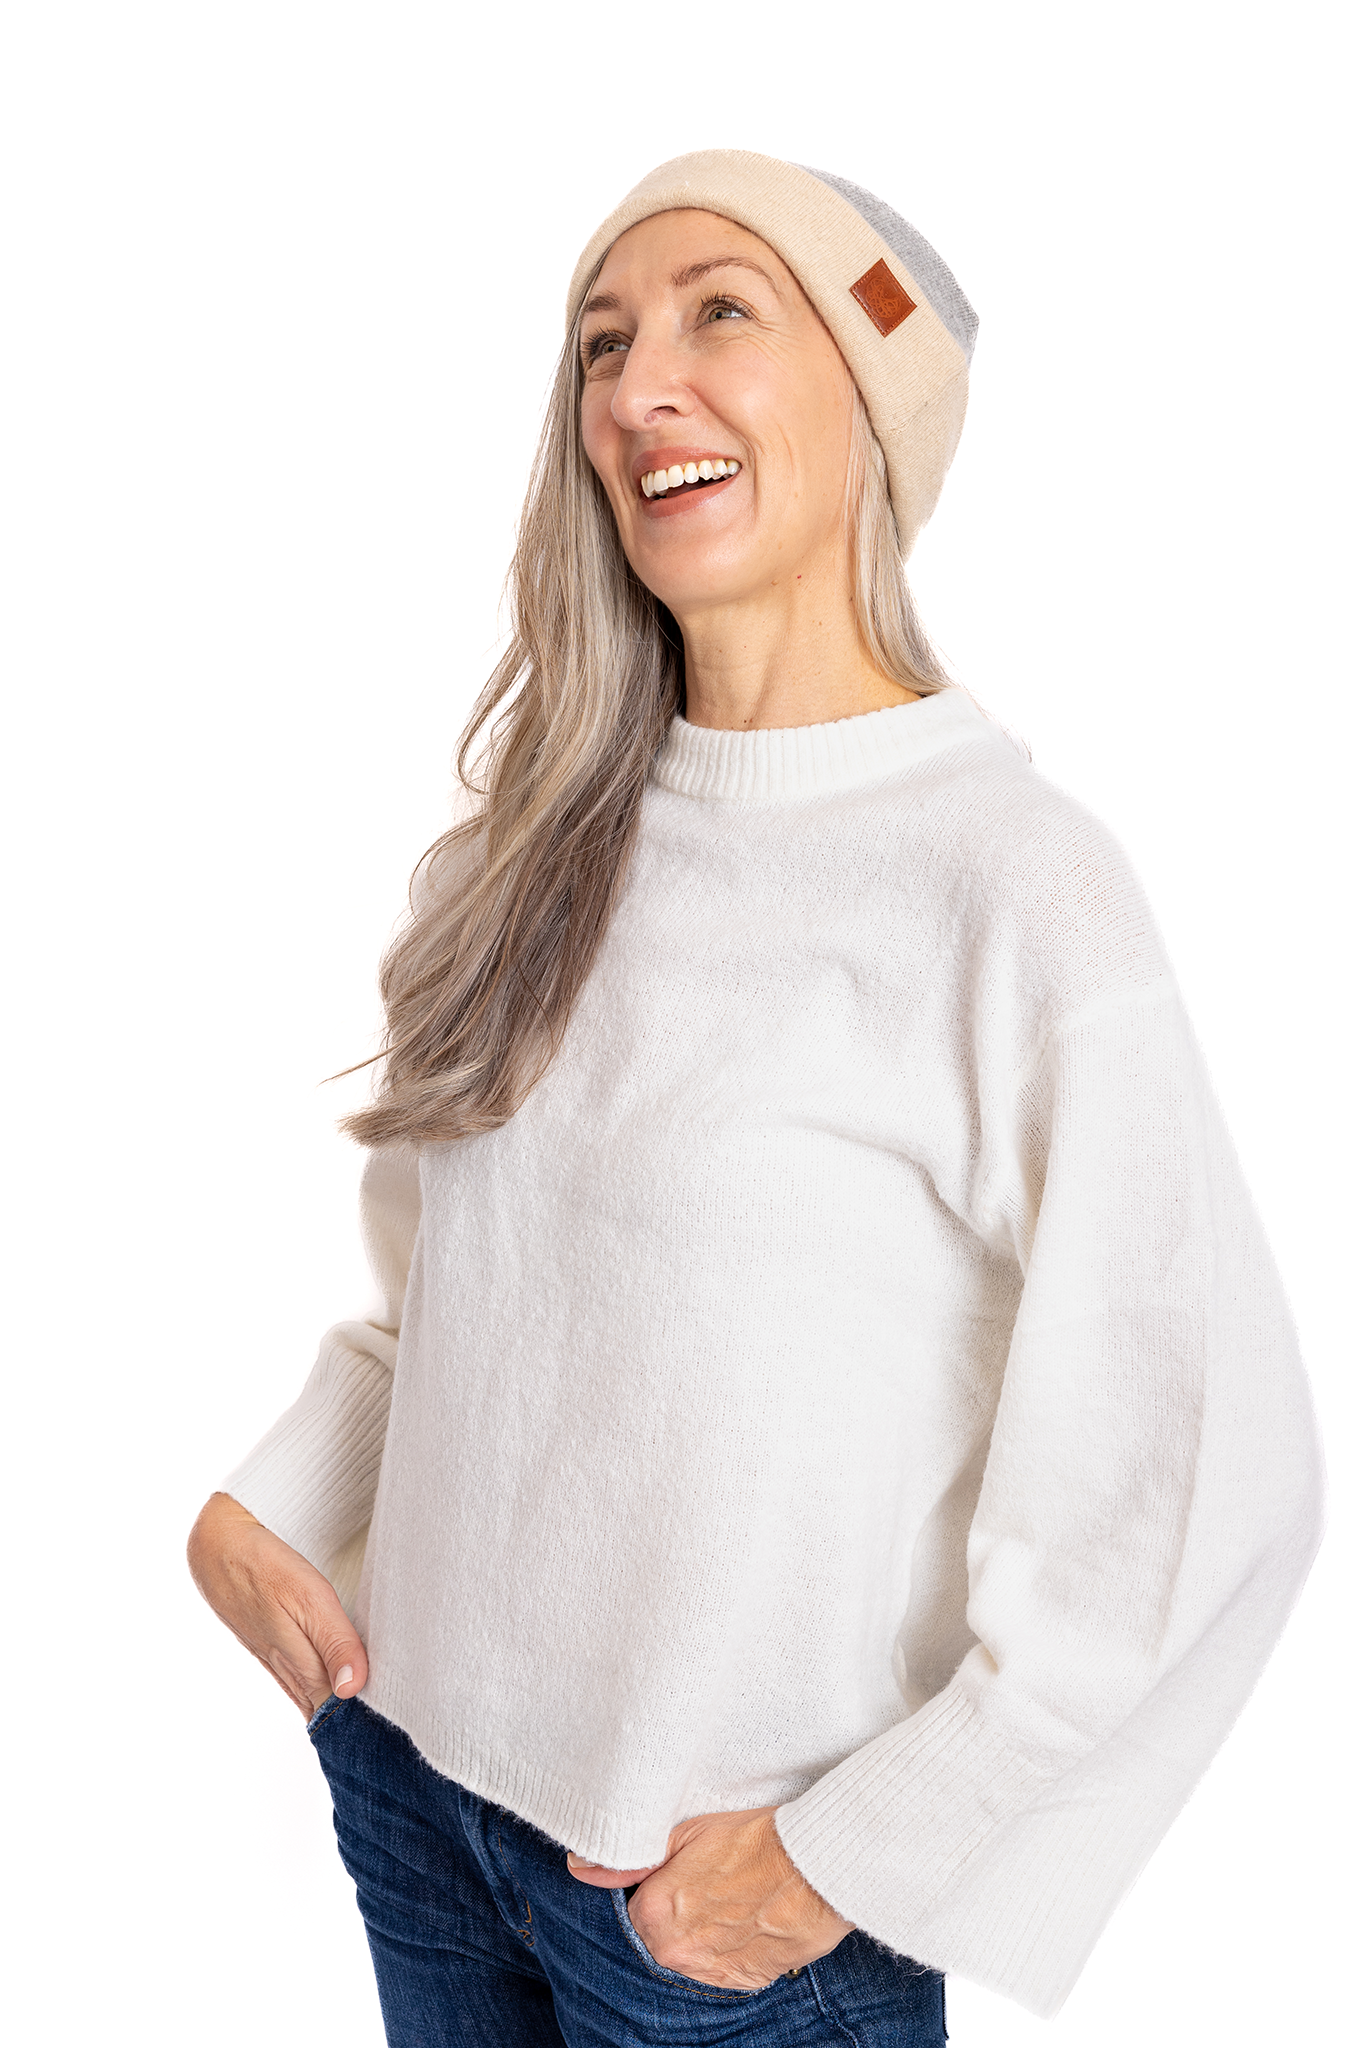 Light Gray and Light Beige - Reversible Cashmere Beanie